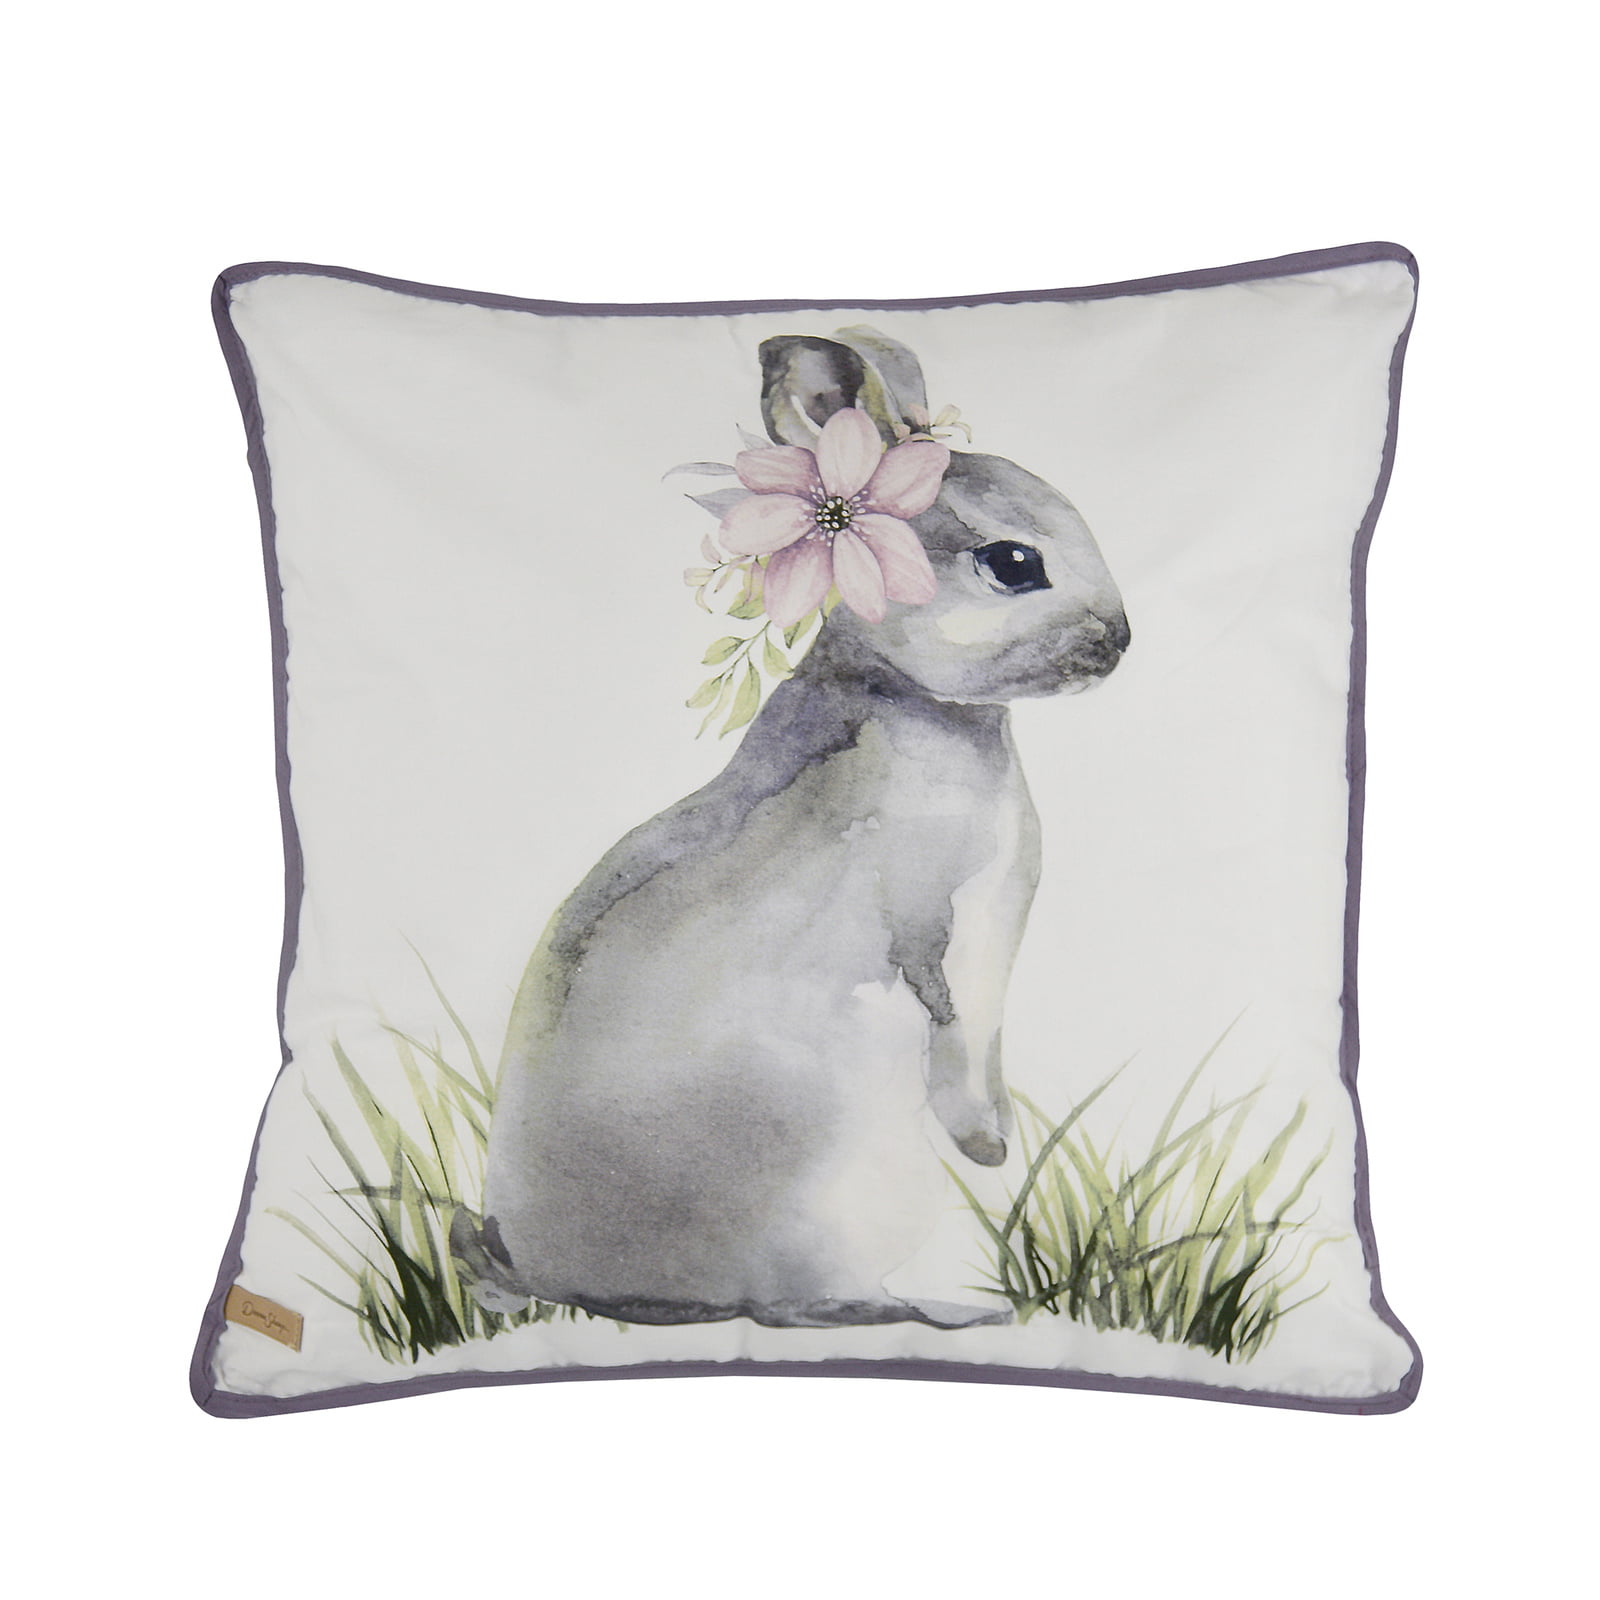 85041 18 X 18 In. Forget Me Not Decorative Pillow Bunny, Multi Color